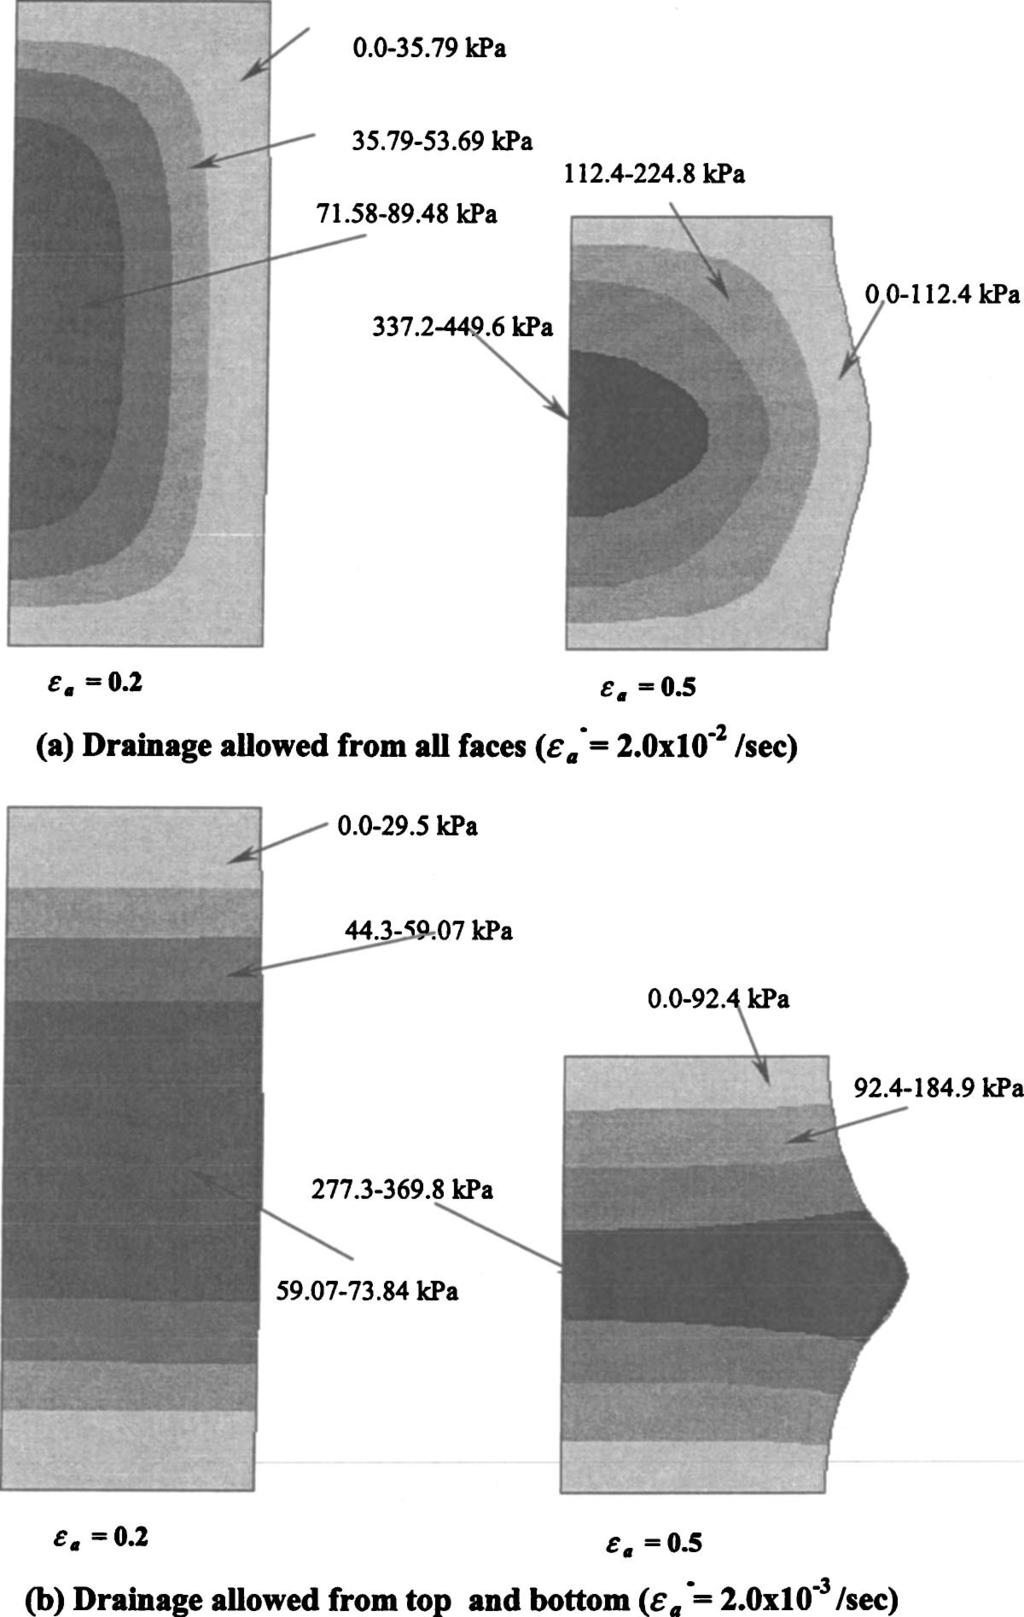 Fig. 14. Pore pressure distribution inside specimen when total axial strain applied to specimen is 0.2 and 0.